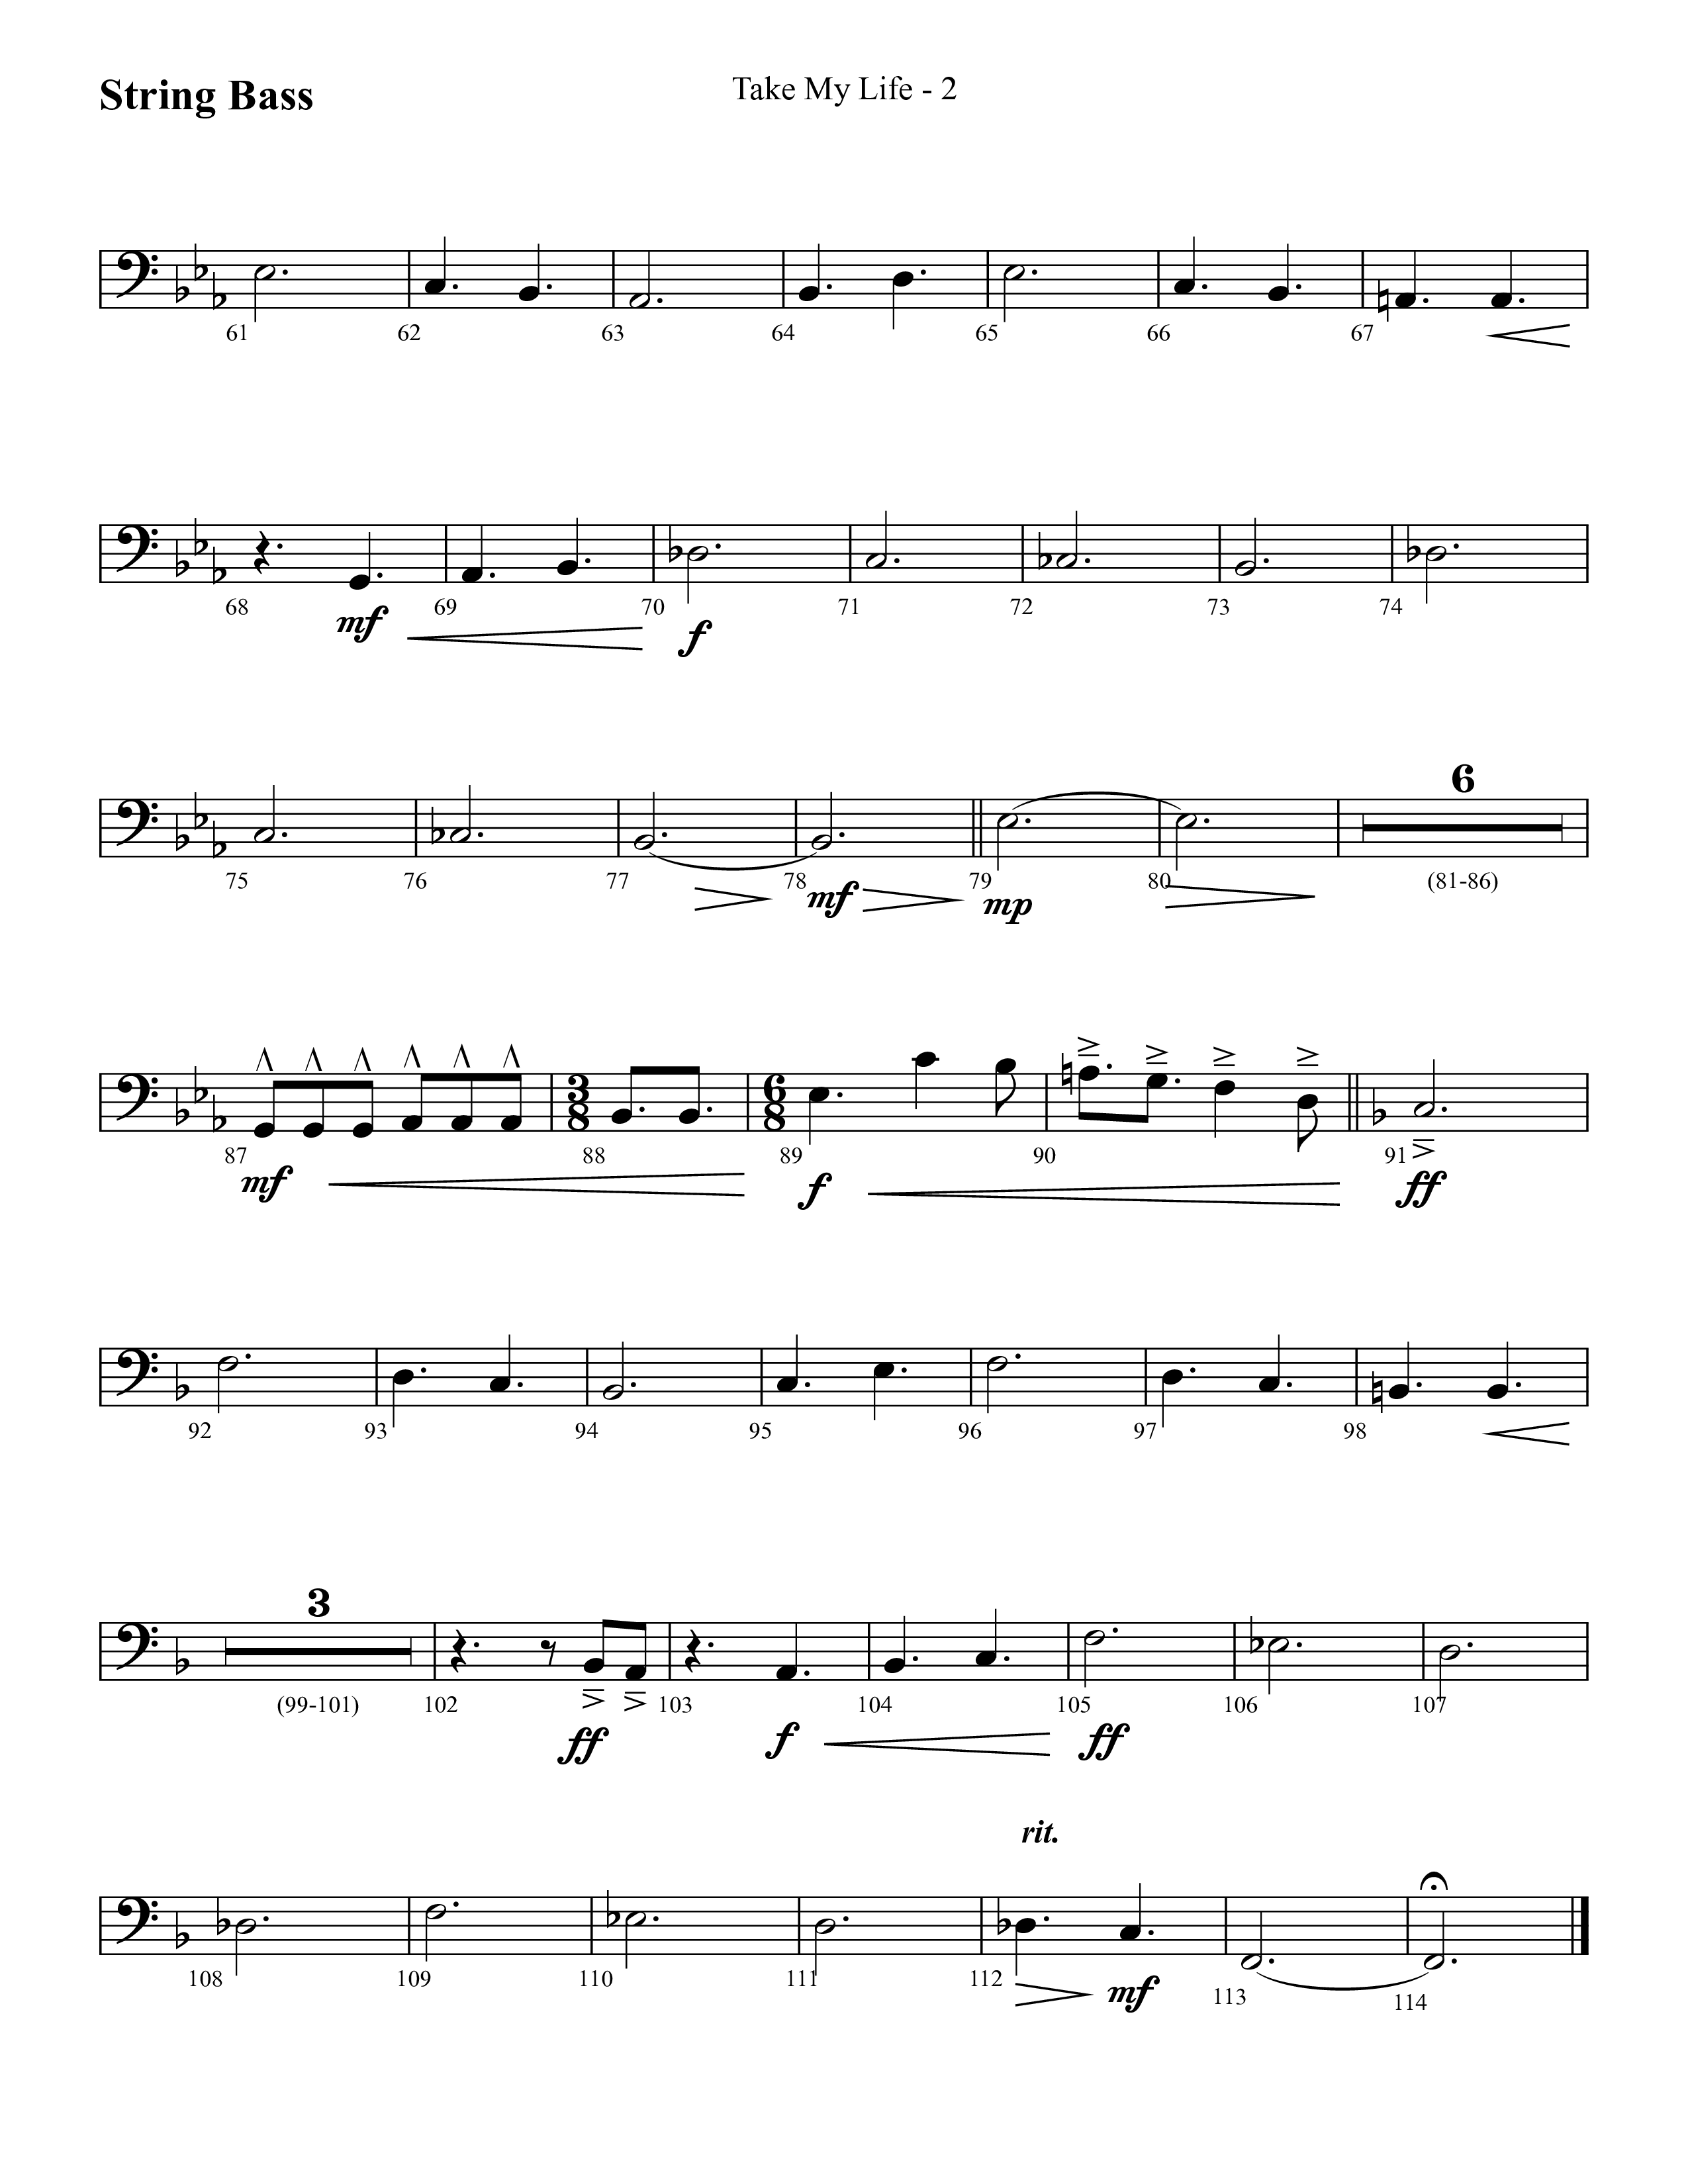 Take My Life (with Take My Life And Let It Be, Take My Life) (Choral Anthem SATB) String Bass (Lifeway Choral / Arr. Cliff Duren)